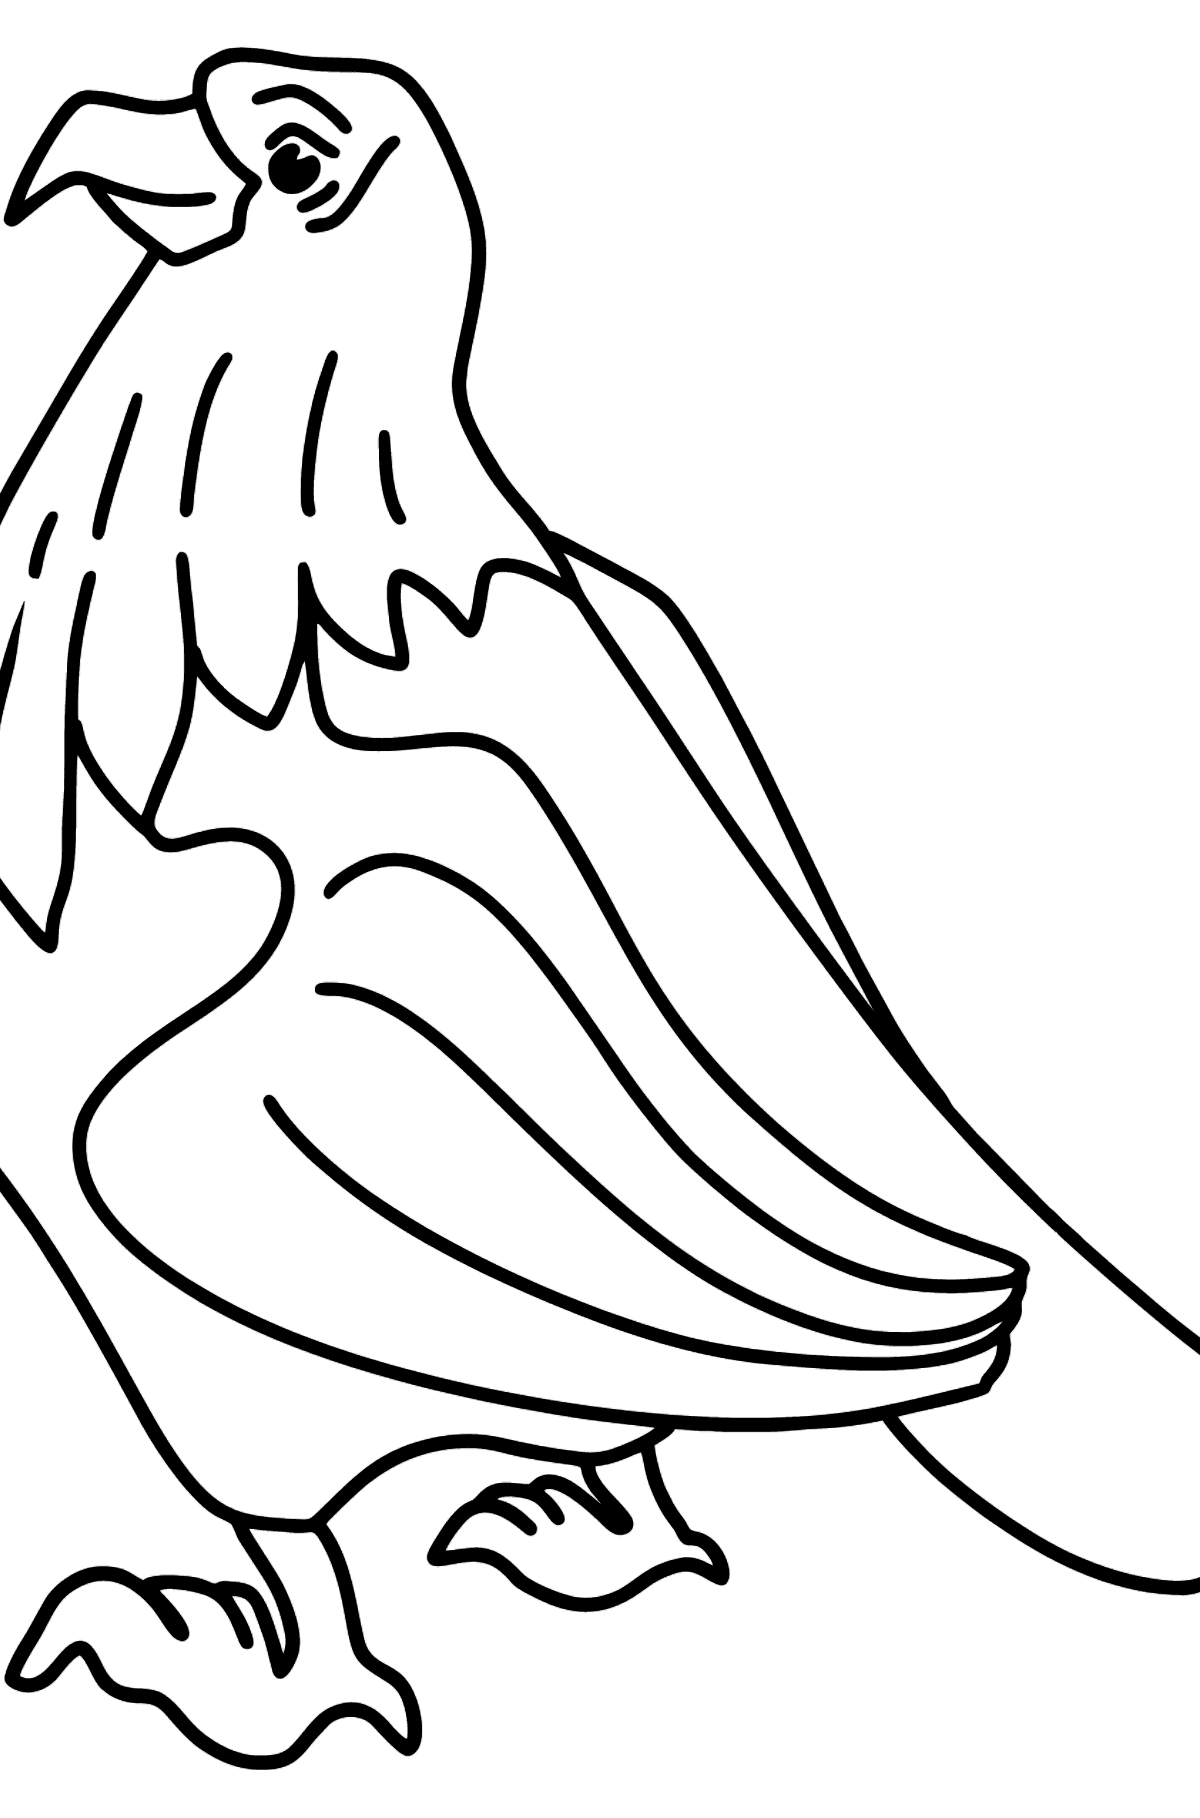 Hawk coloring page - Coloring Pages for Kids